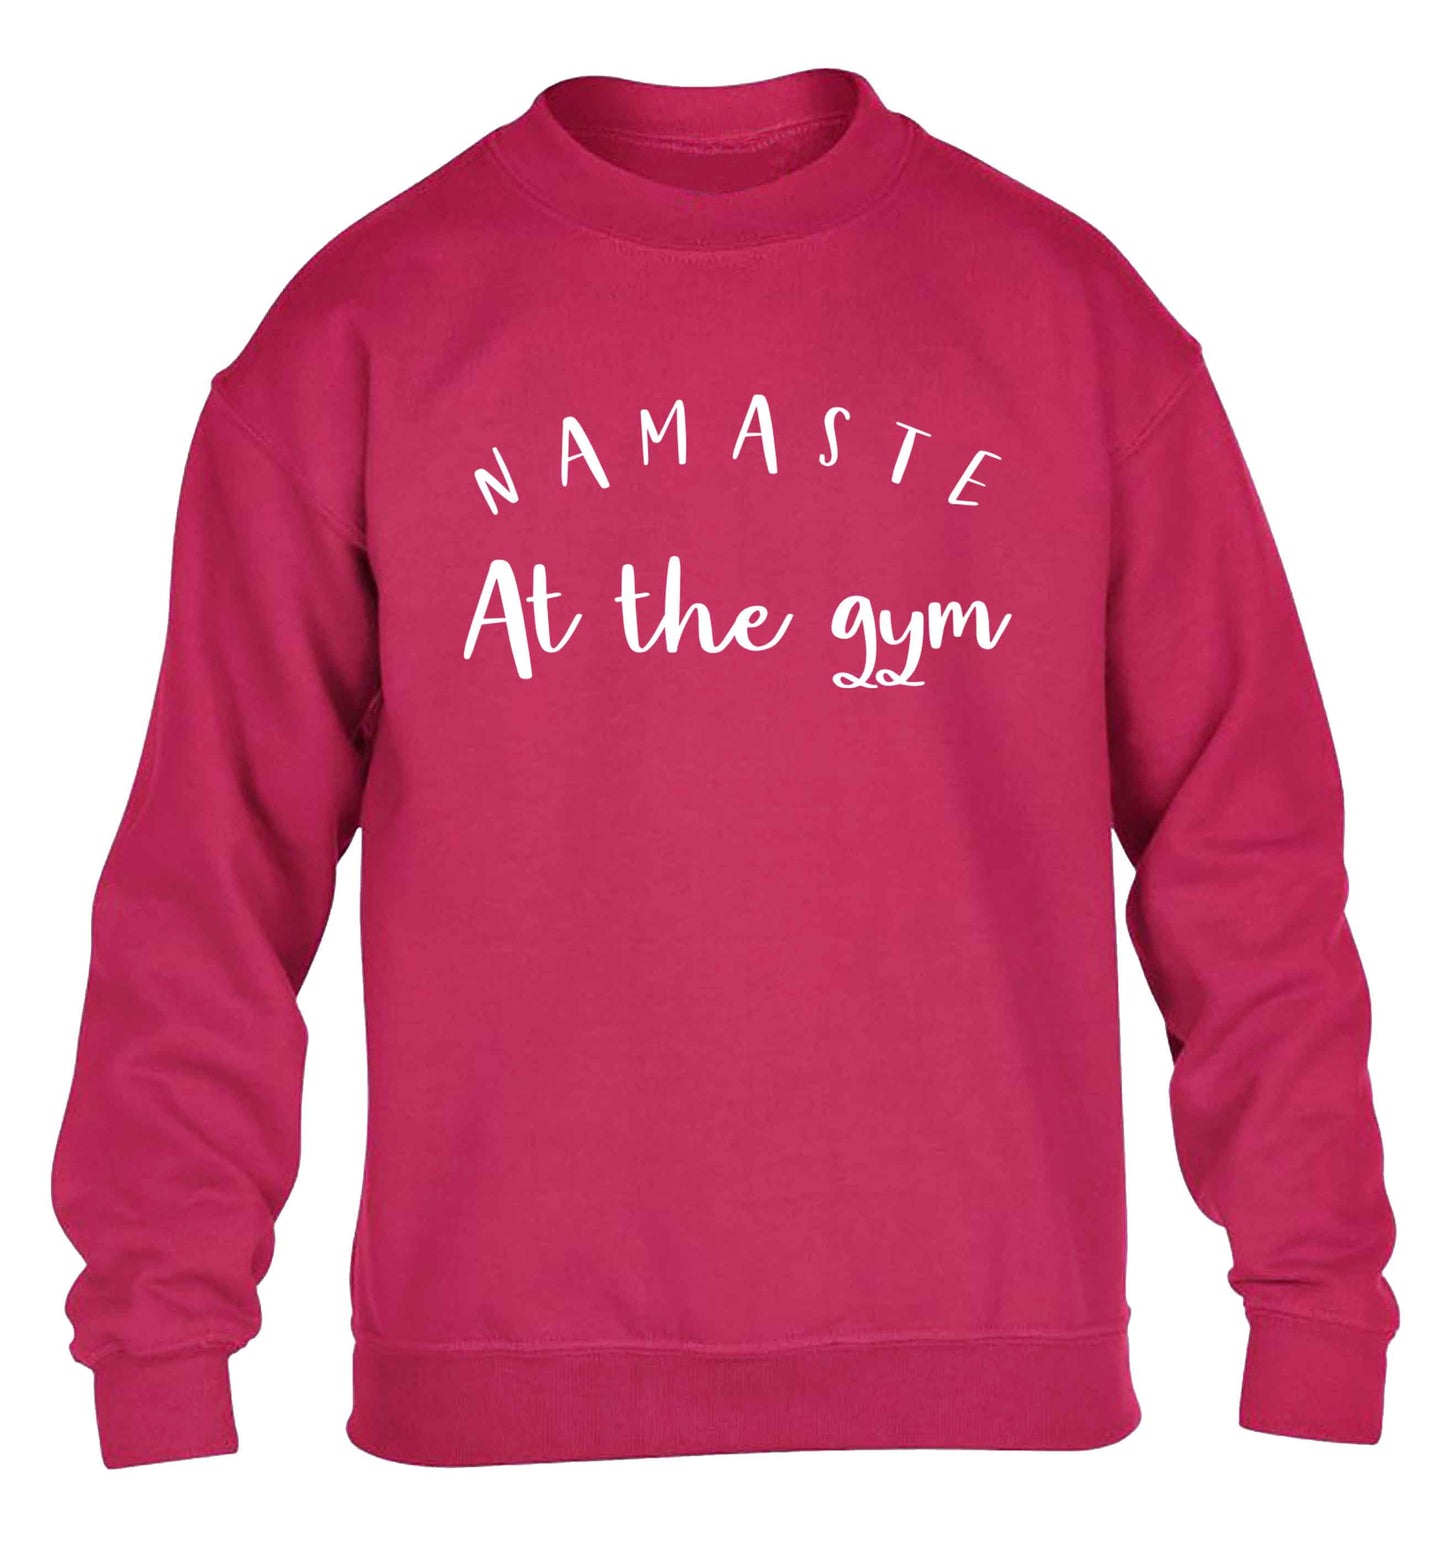 Namaste at the gym children's pink sweater 12-13 Years